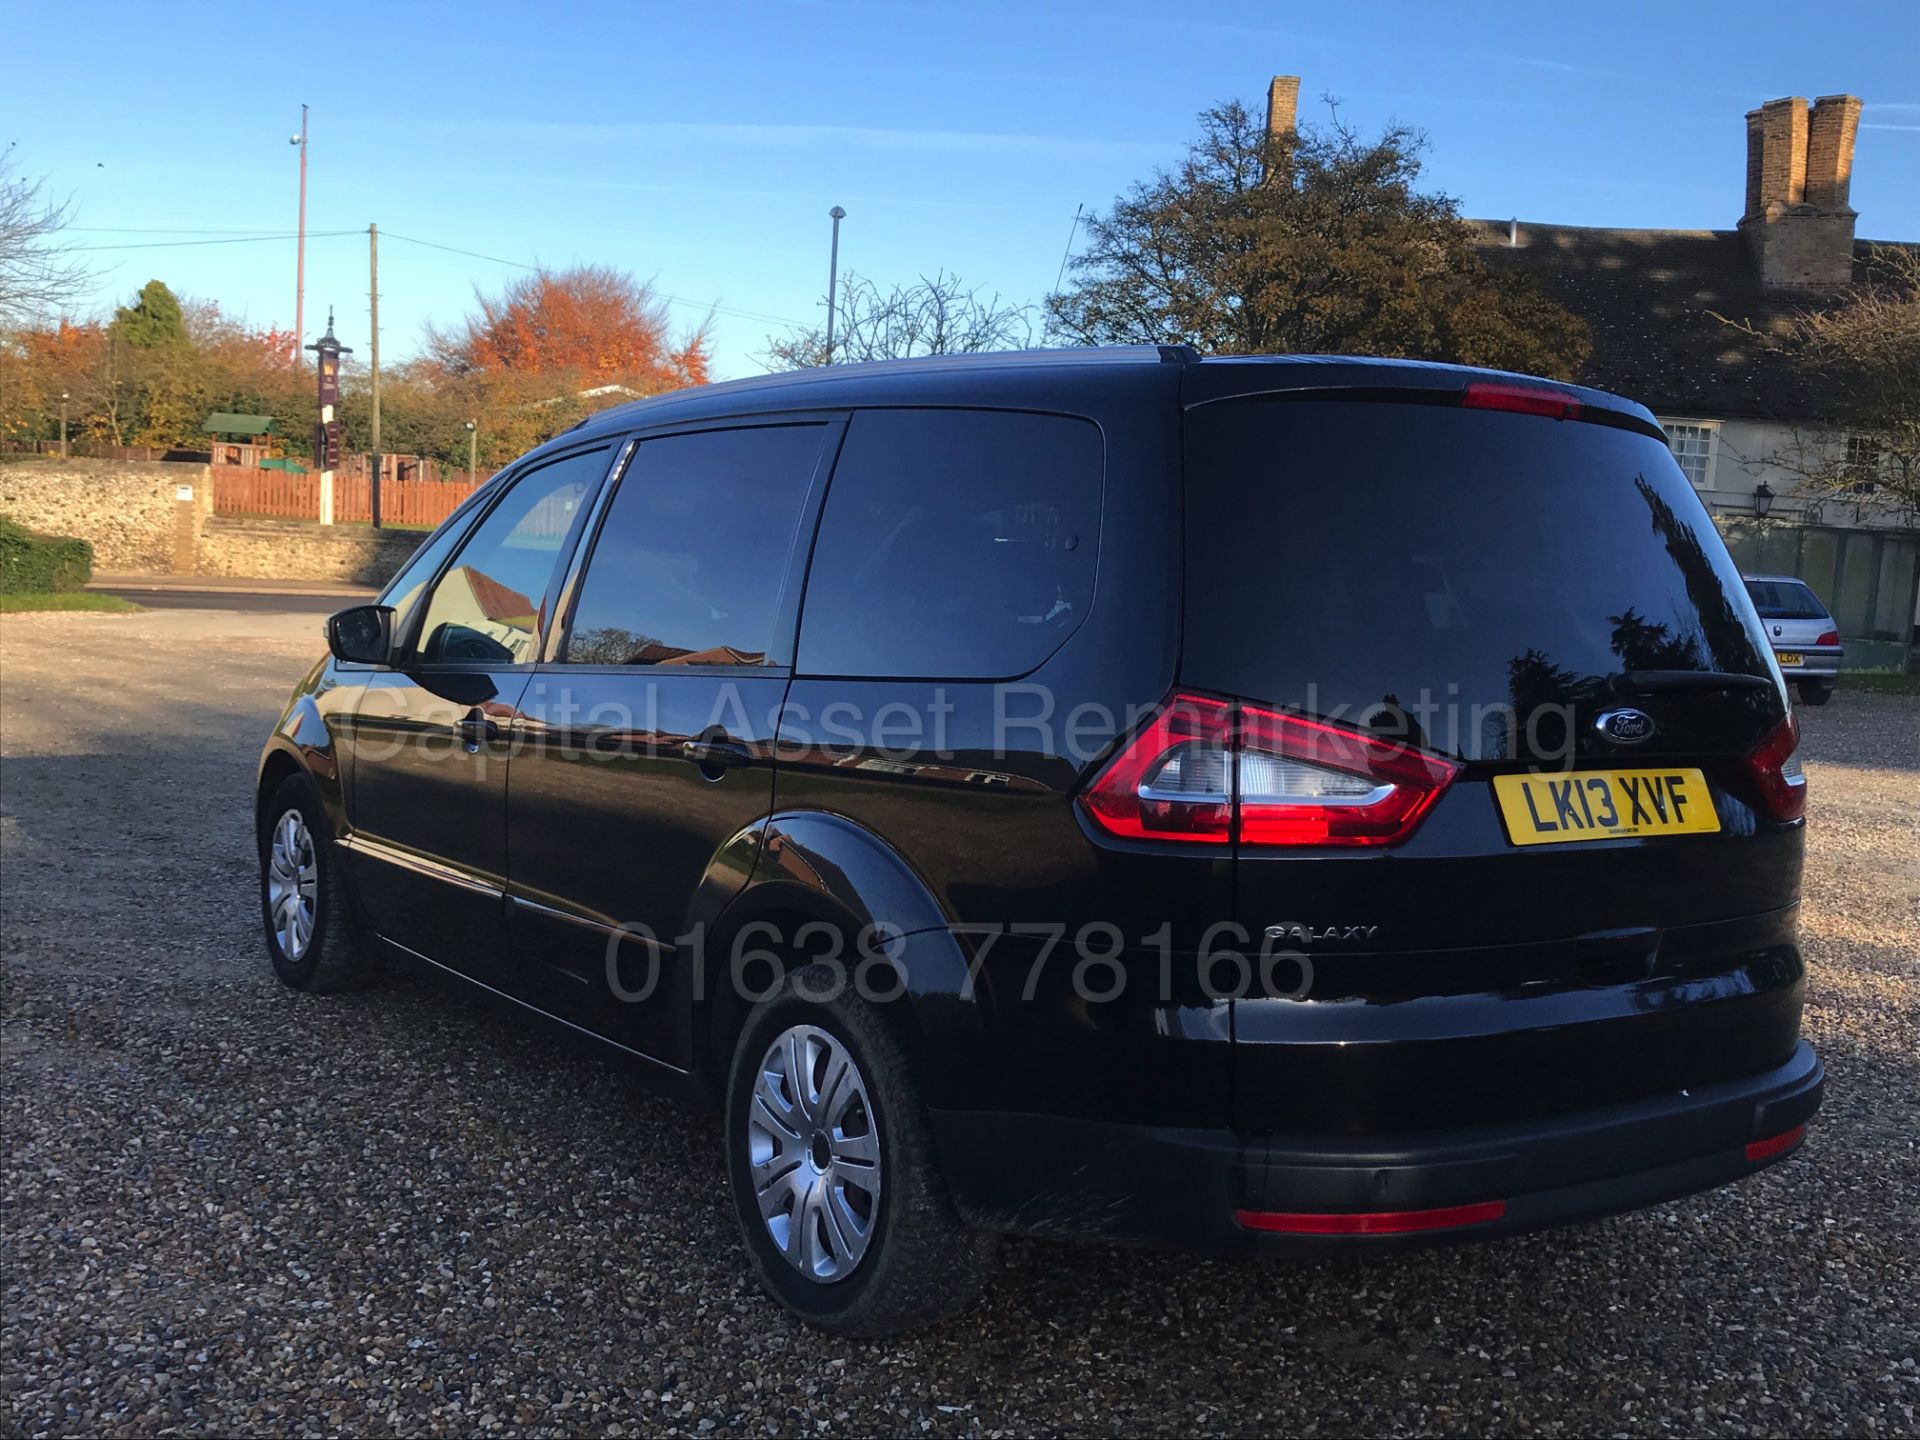 (On Sale) FORD GALAXY 'ZETEC' 7 SEATER MPV (2013) '2.0 TDCI -140 BHP' (1 OWNER) *FULL HISTORY* - Image 8 of 29